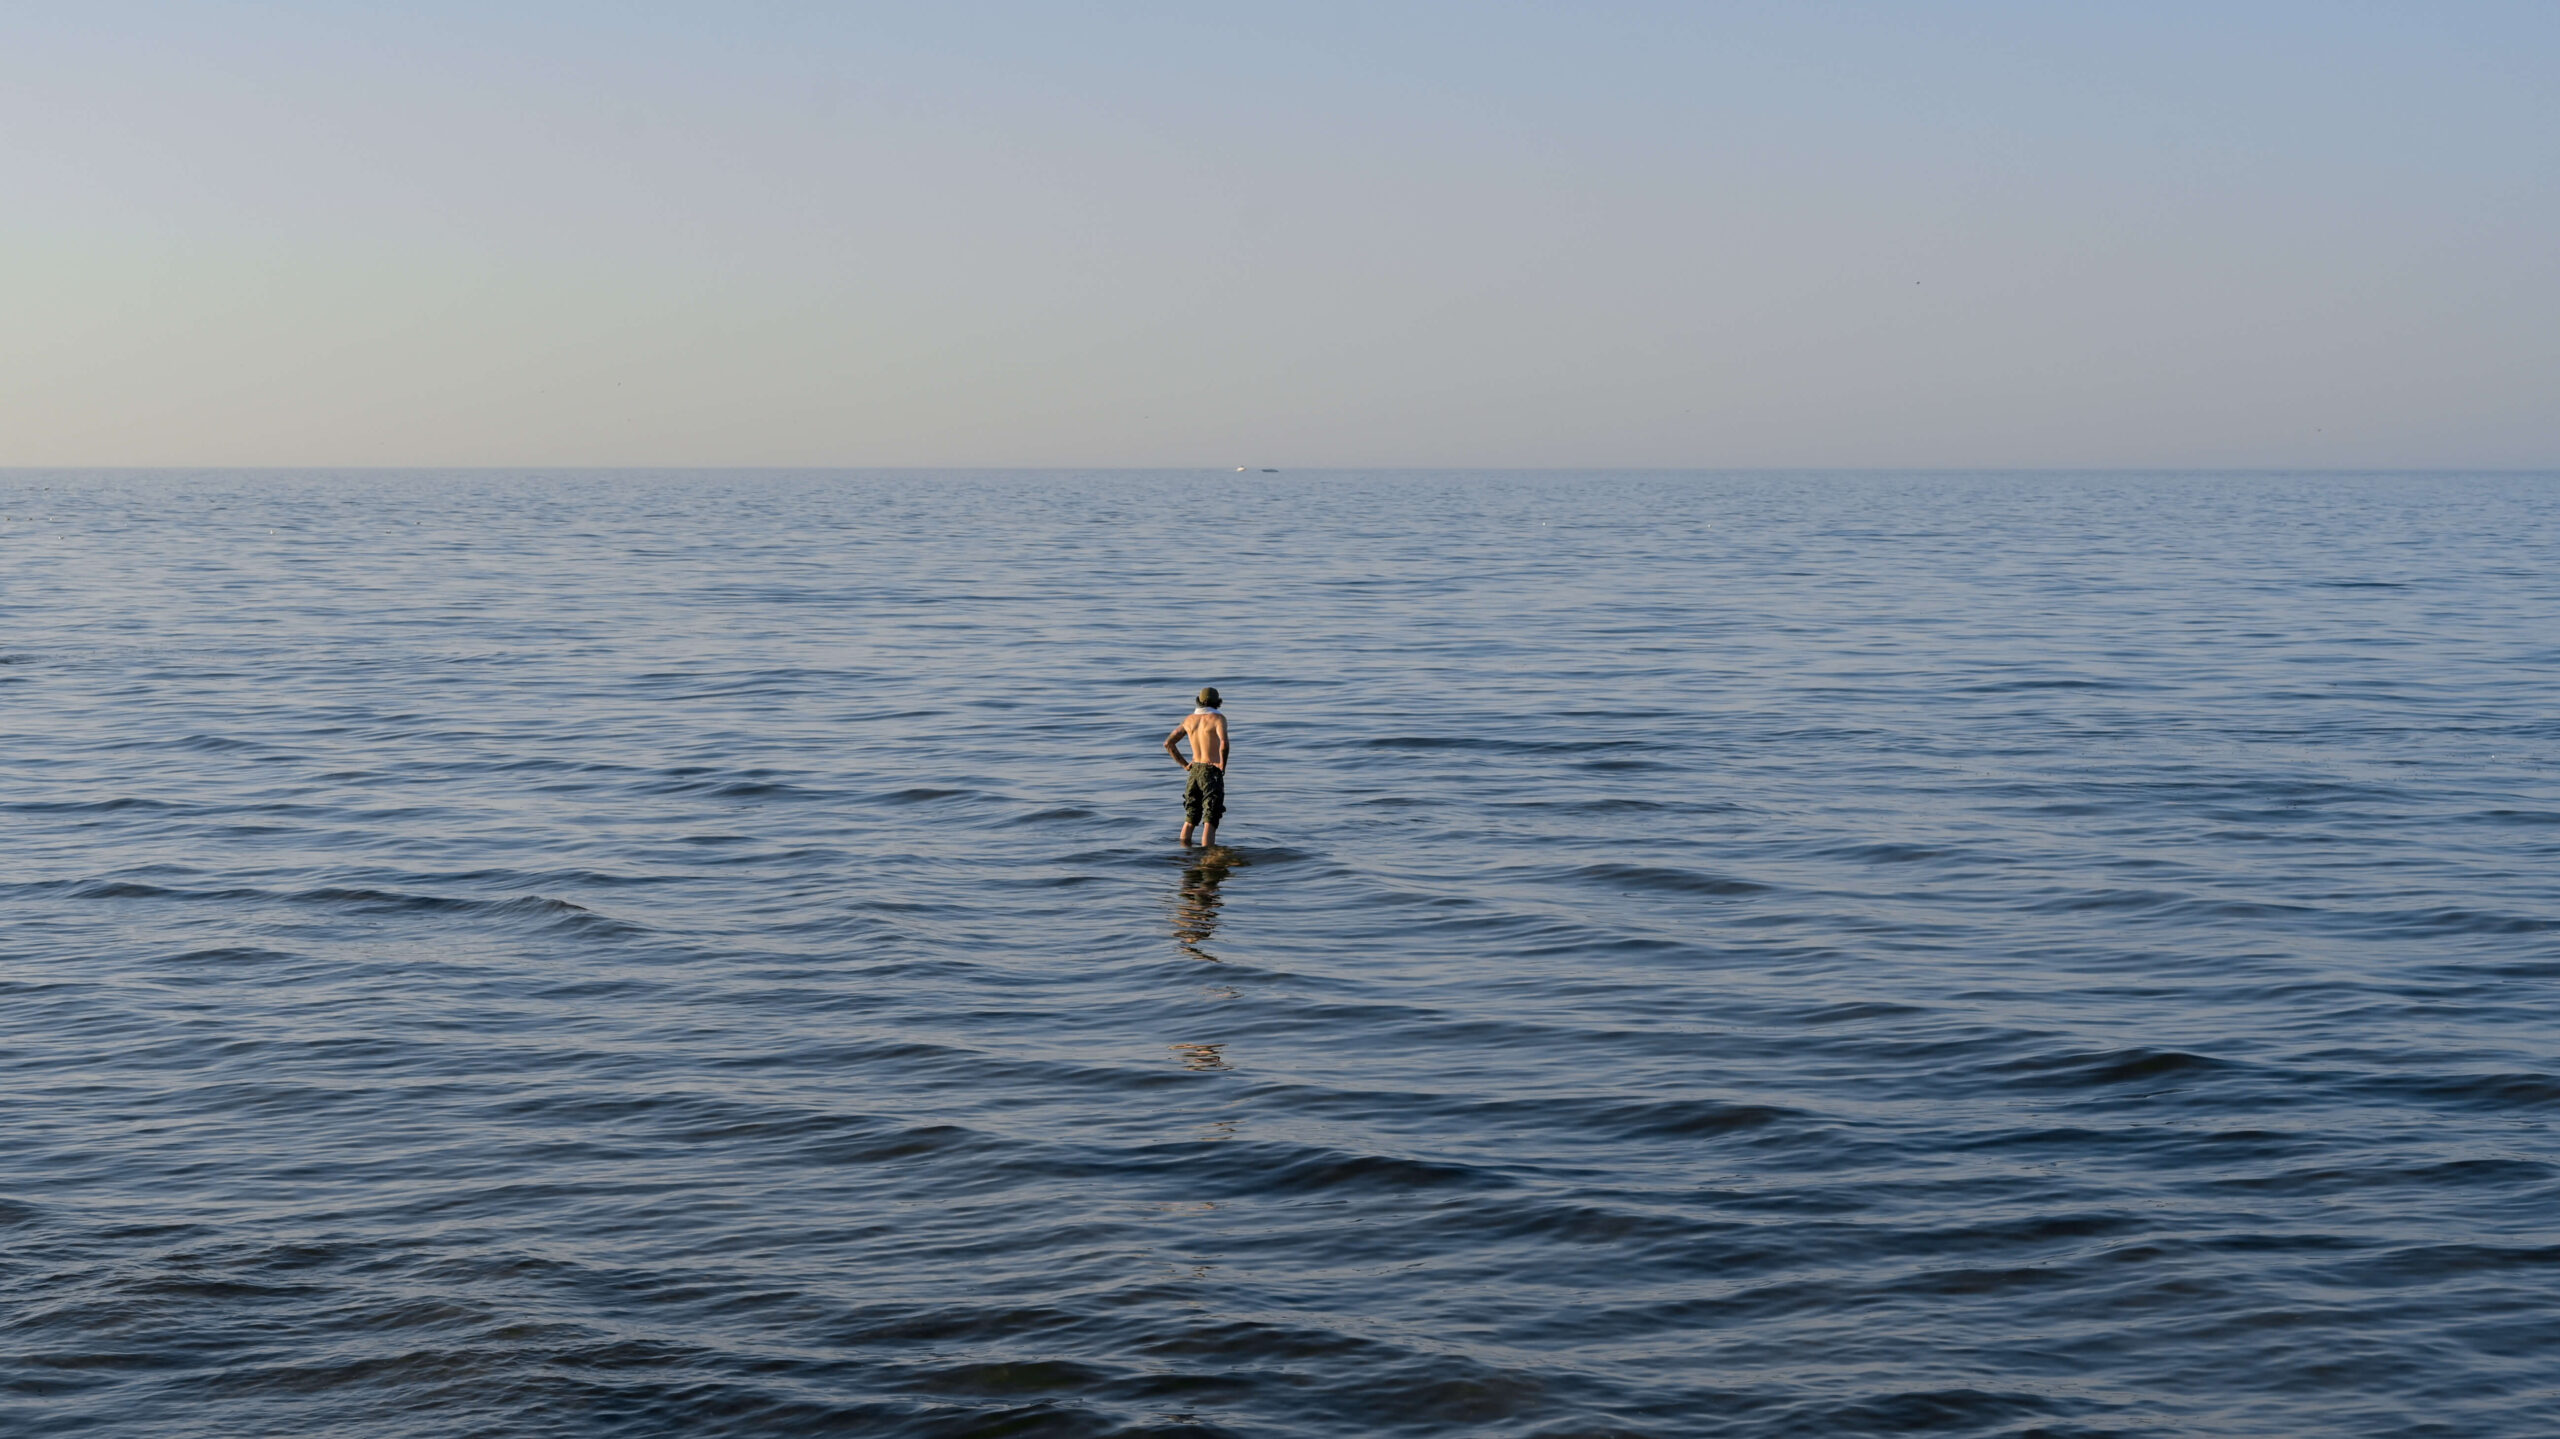 A person stands in the expansive, calm sea under a clear sky, with water stretching to the horizon. Their reflection is visible on the water's surface, creating a tranquil and serene scene.